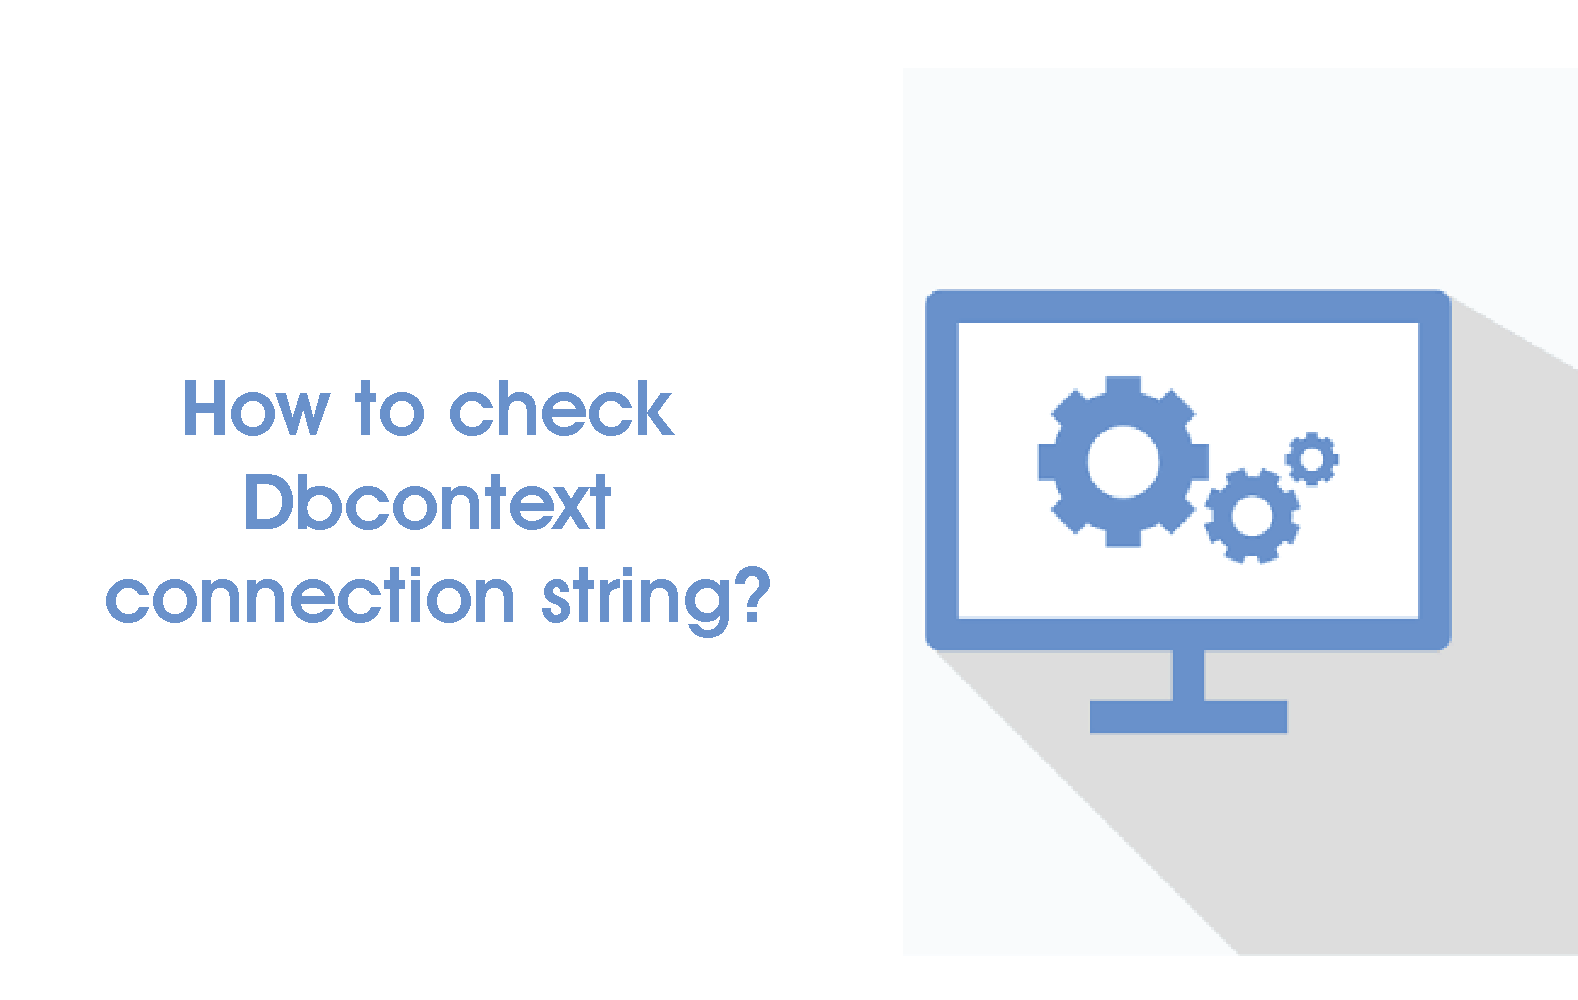 How to check Dbcontext connection string